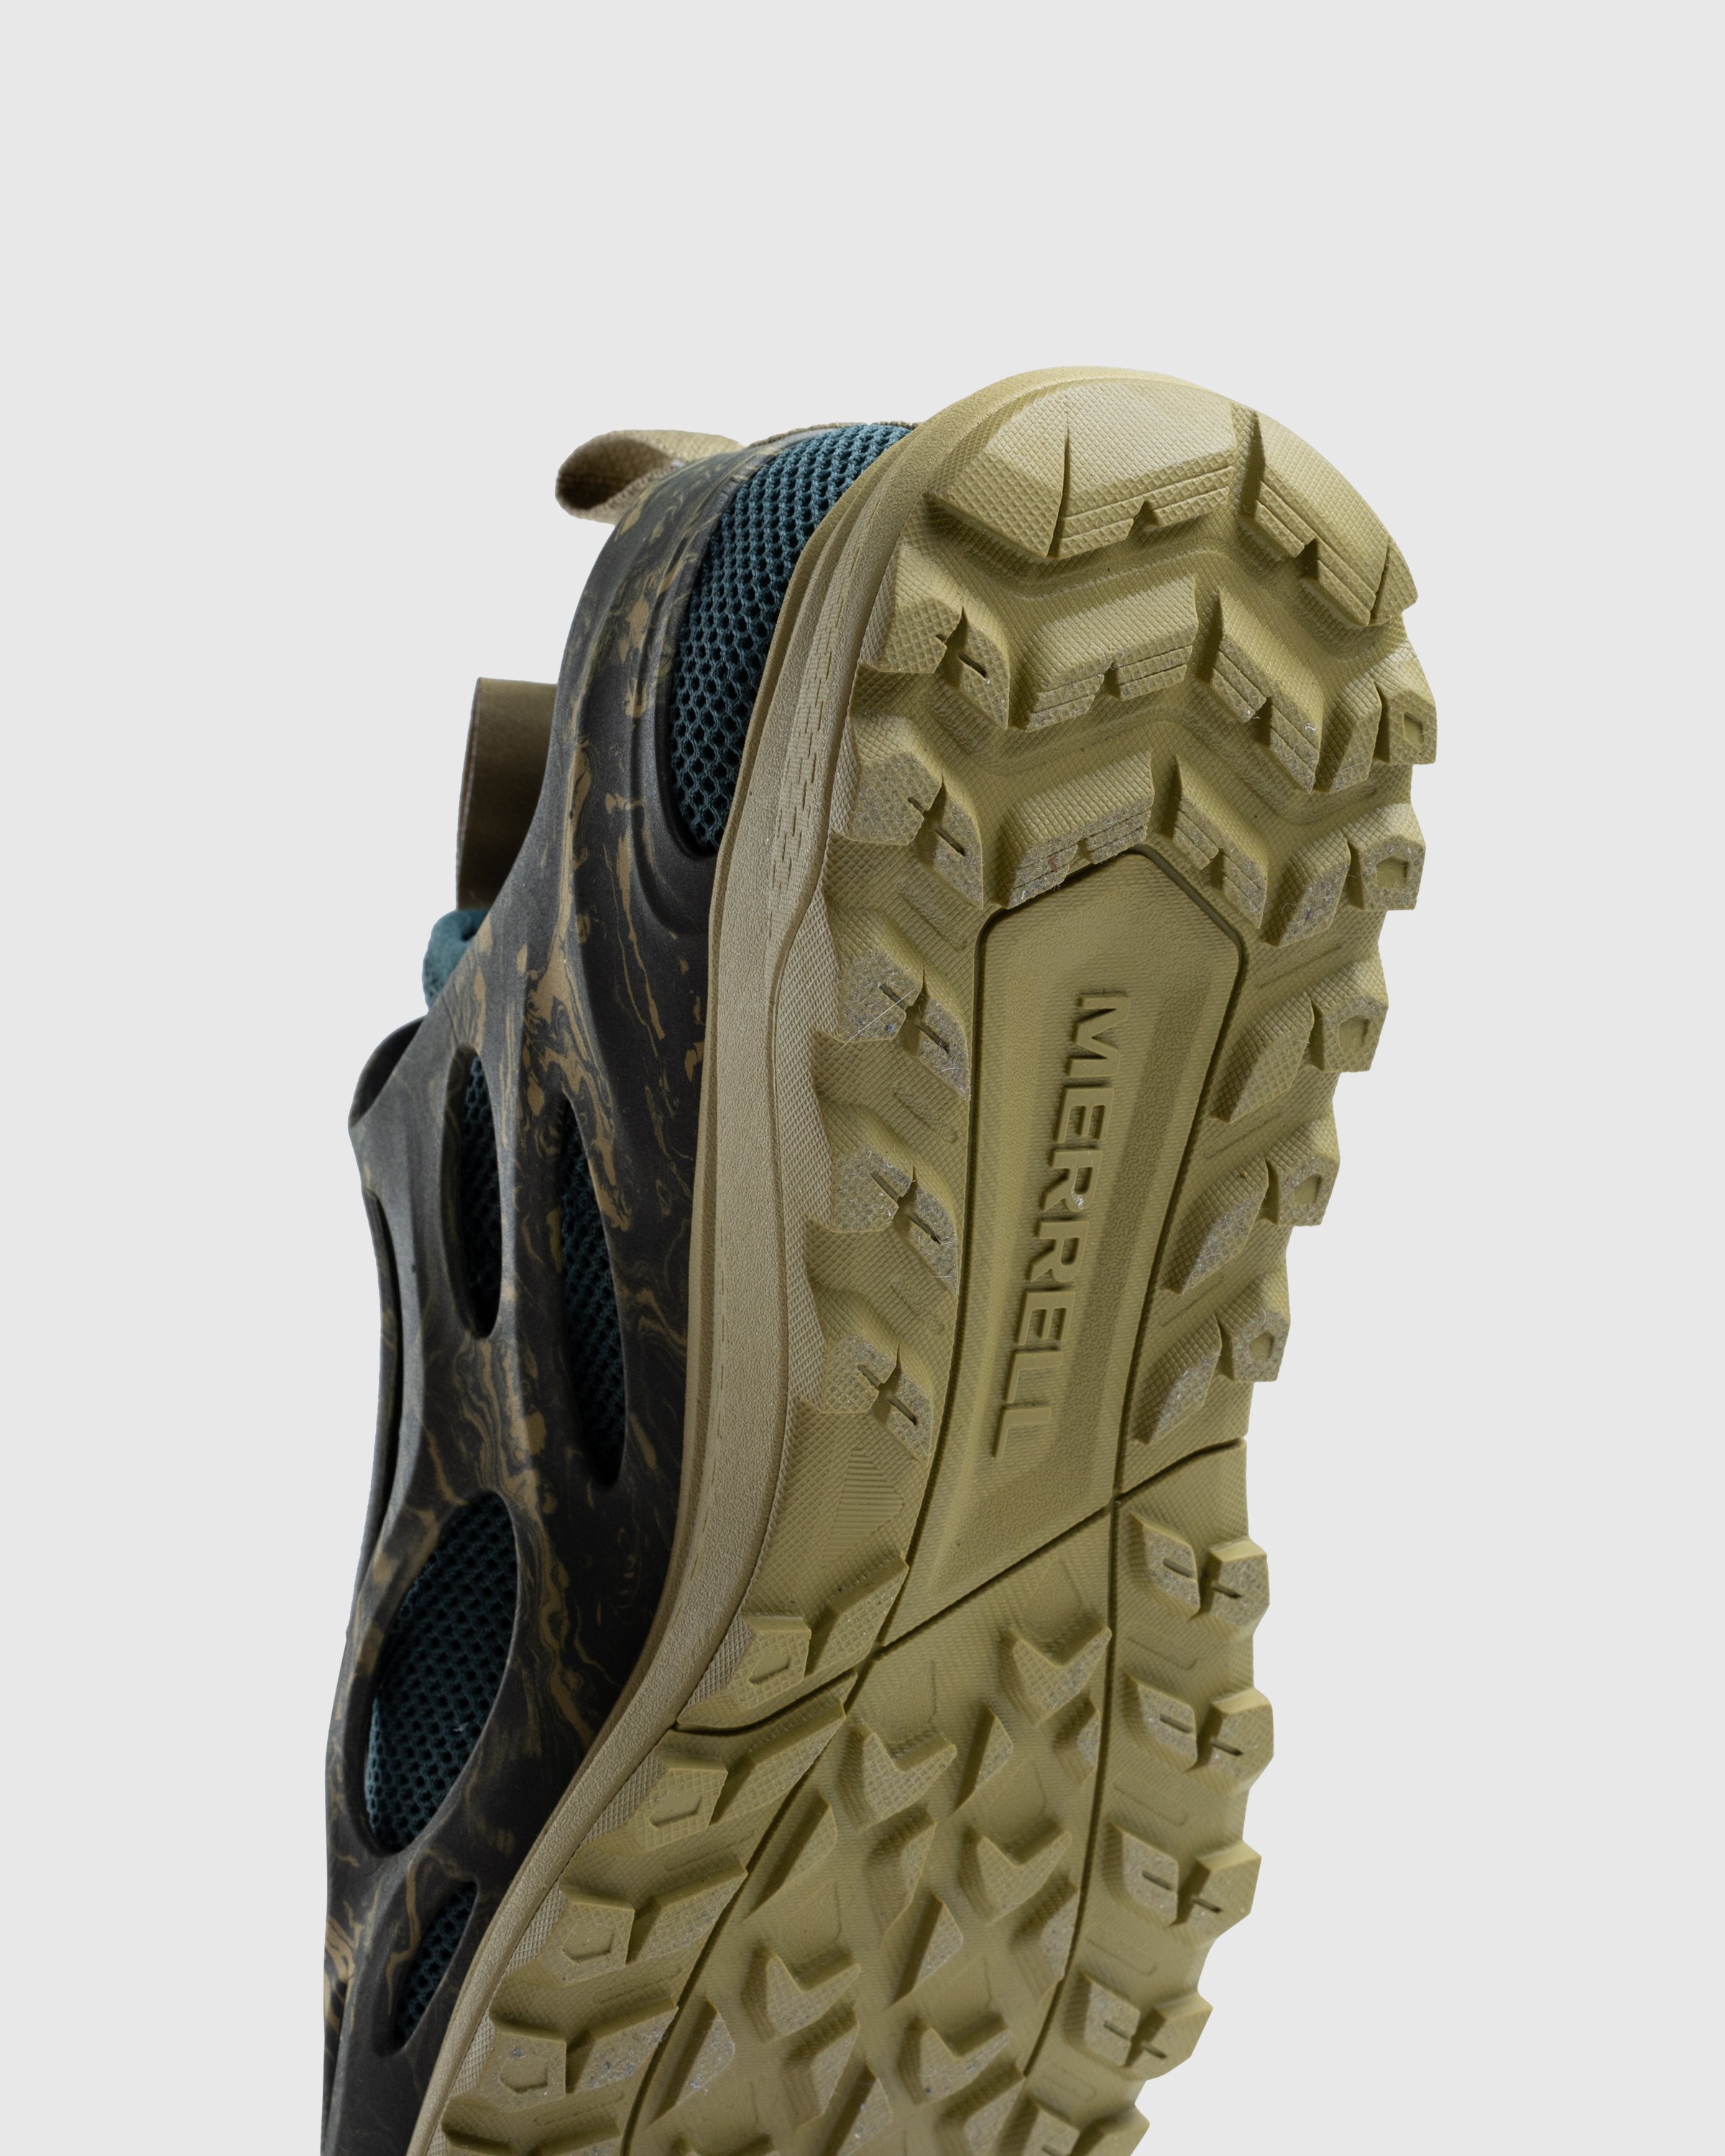 Merrell x Reese Cooper - Hydro Runner Forest Night - Footwear - Green - Image 6